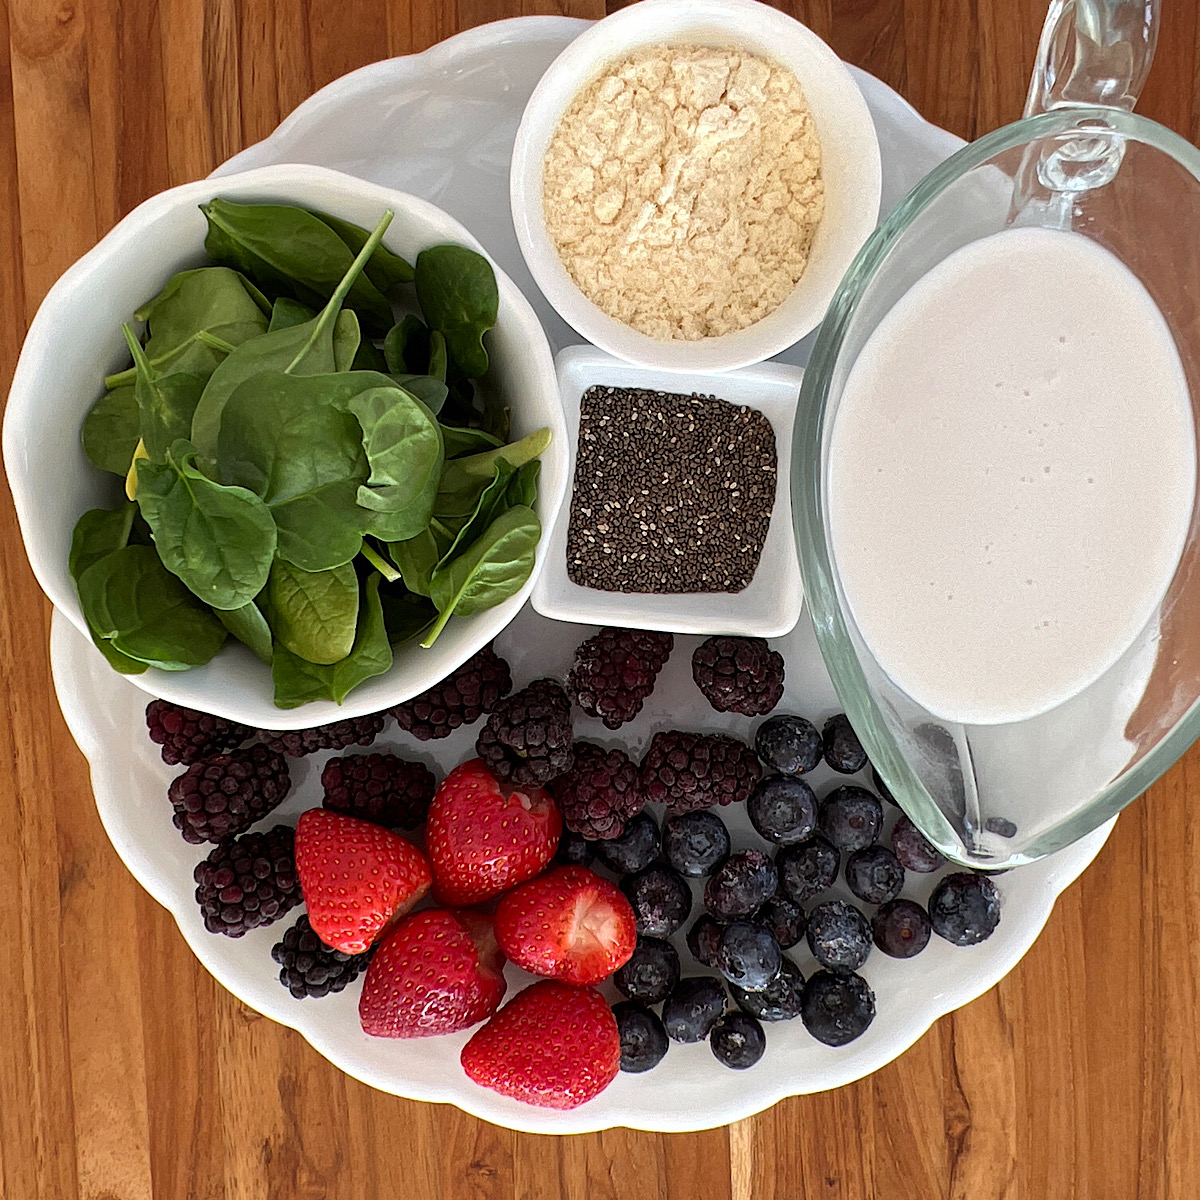 Ingredients for low carb protein berry smoothie.